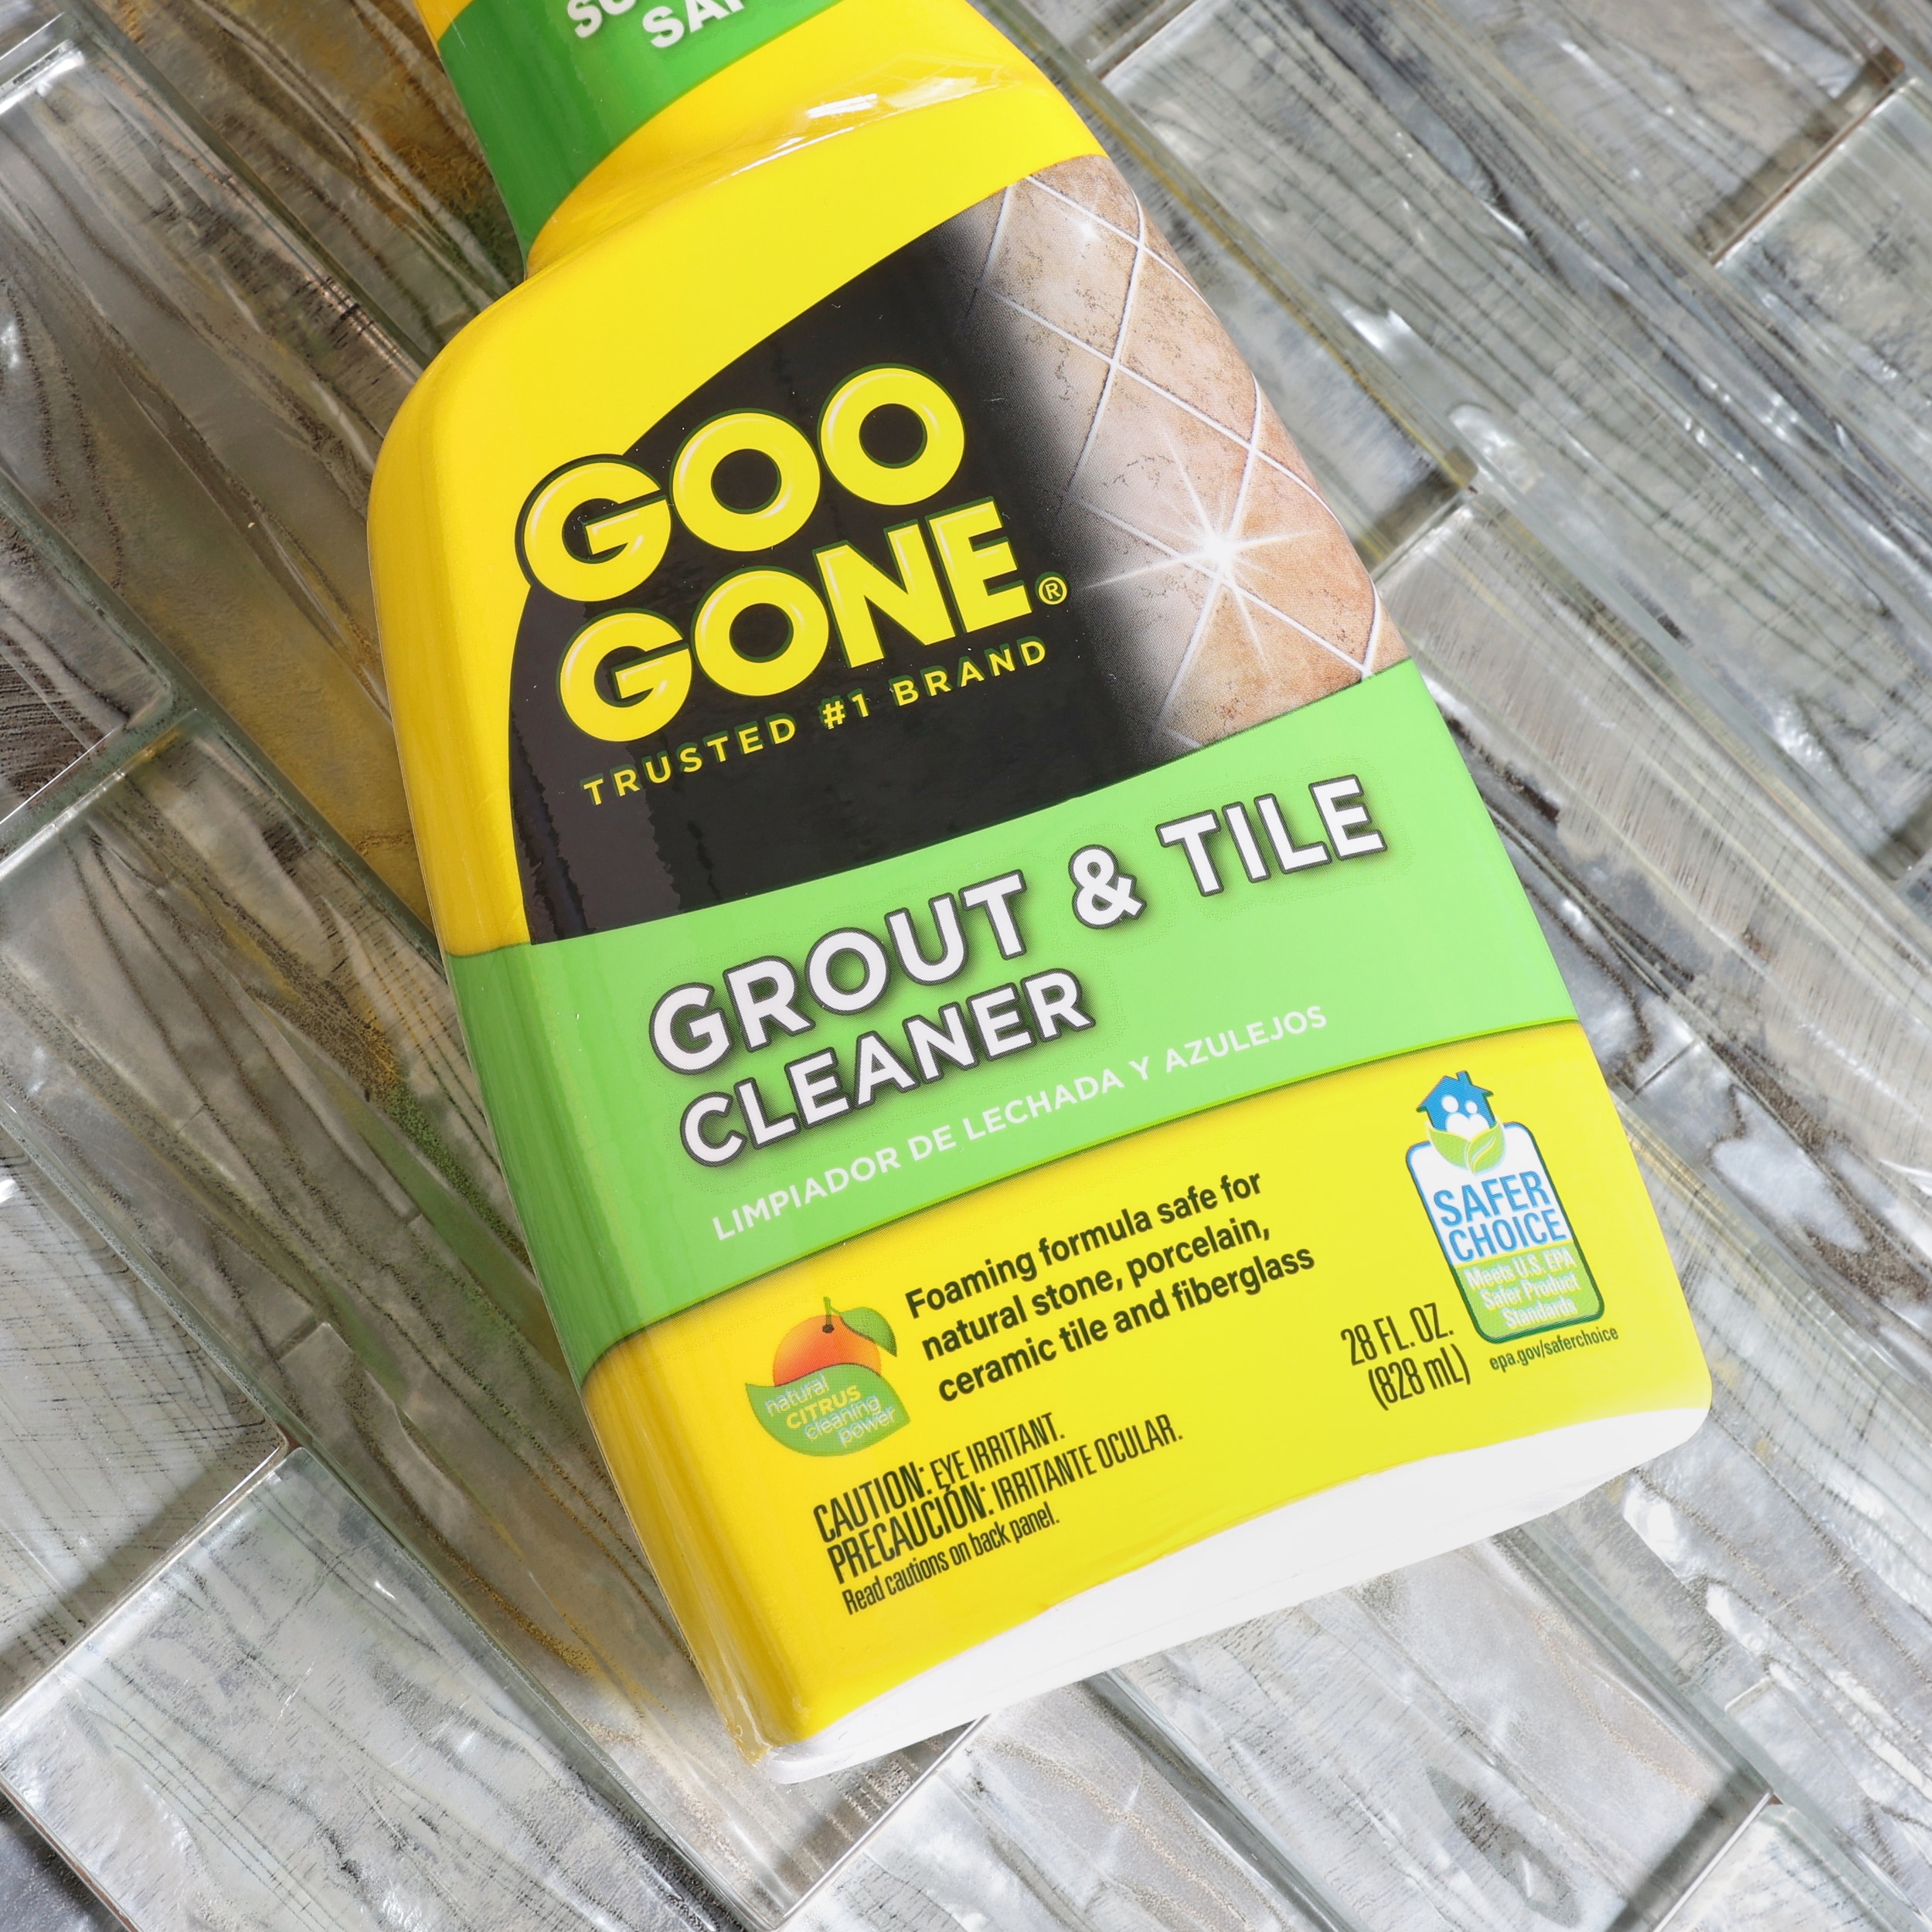 Grout cleaning with #googone grout and tile cleaner. #springcleaning #, Grout